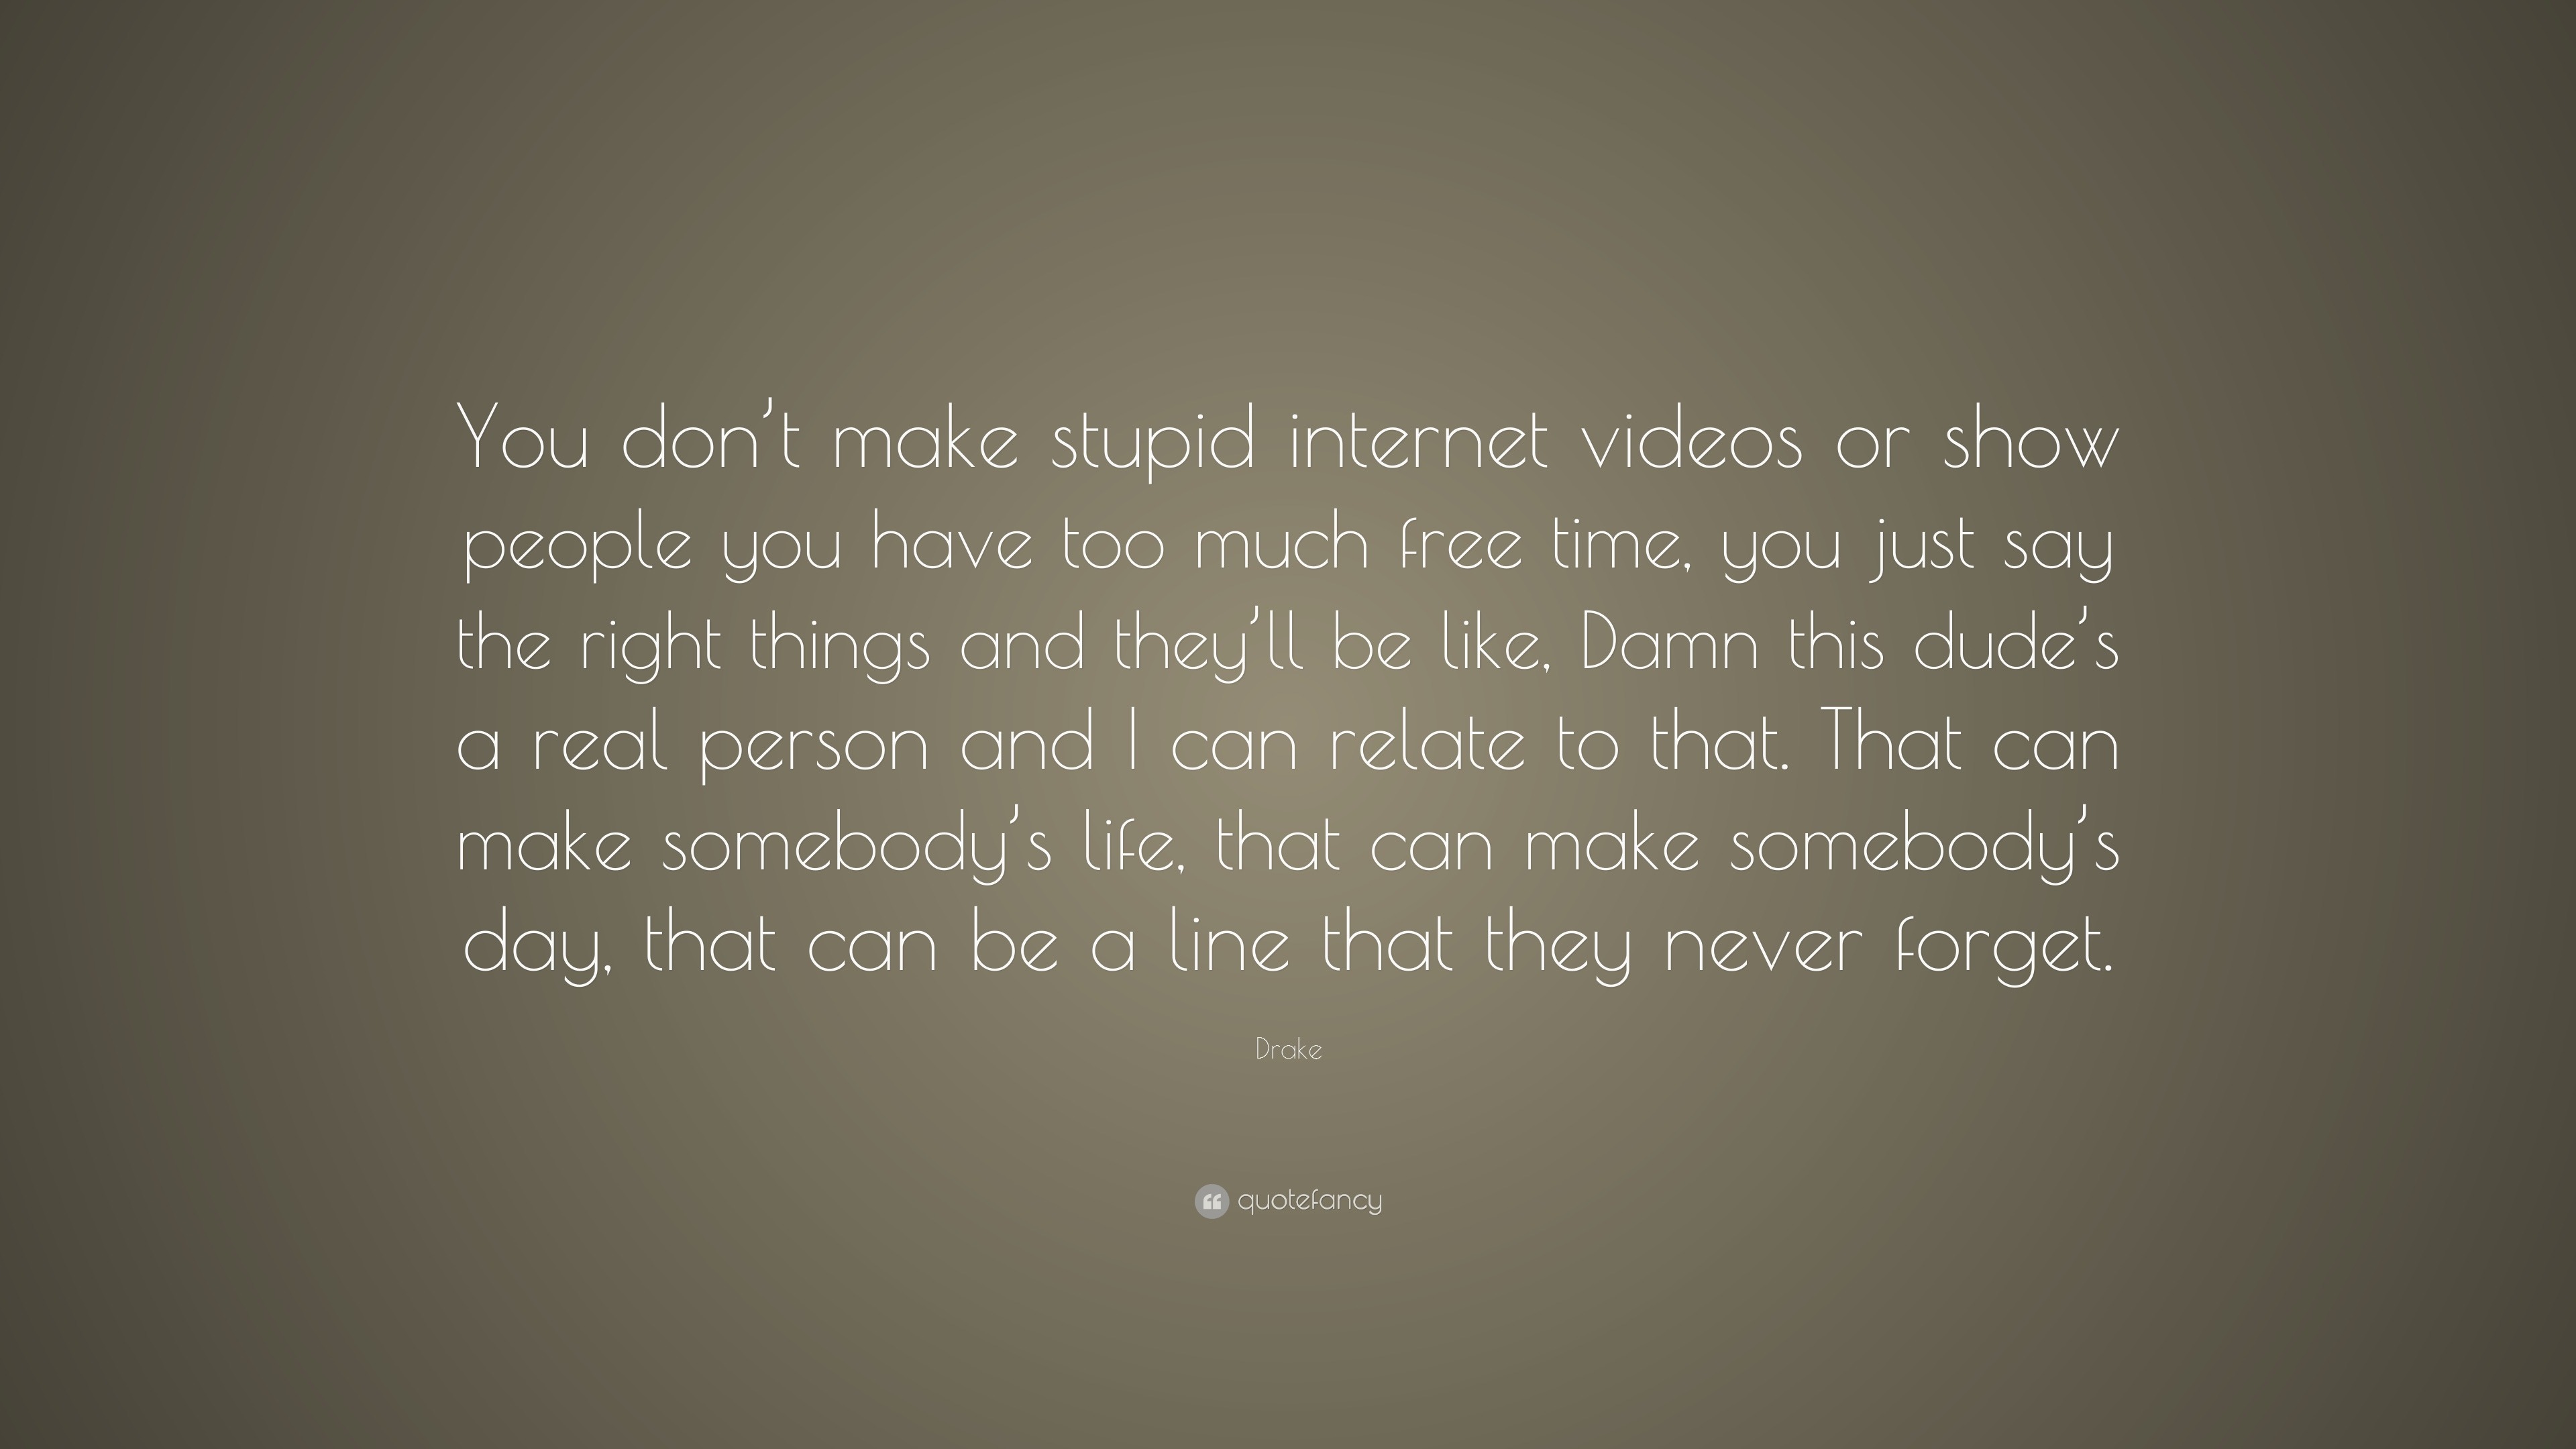 Drake Quote “You don t make stupid internet videos or show people you